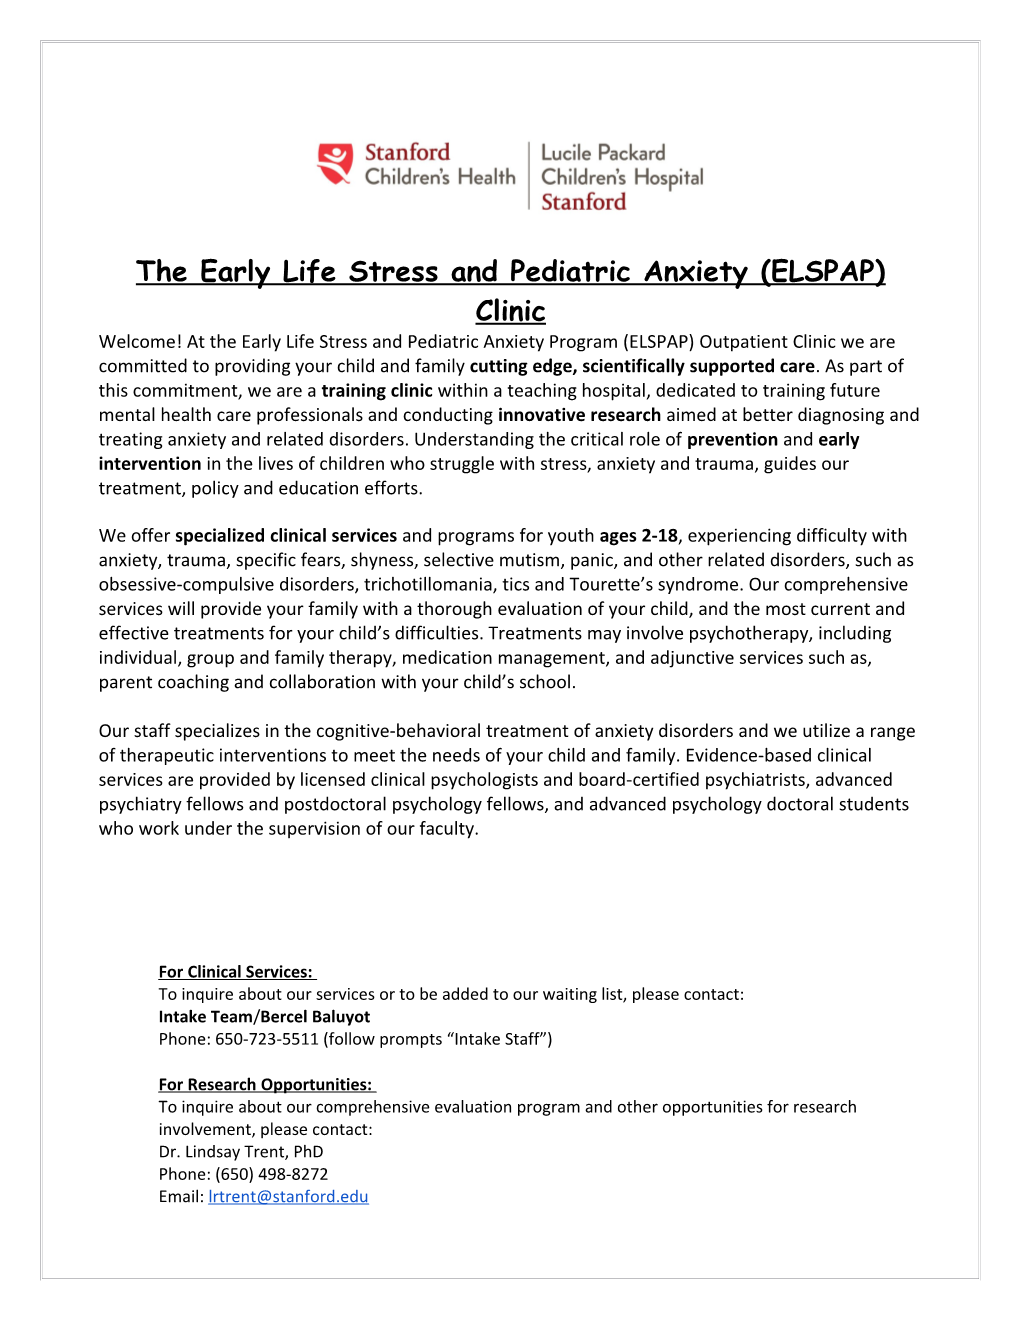 The Early Life Stress and Pediatric Anxiety (ELSPAP) Clinic